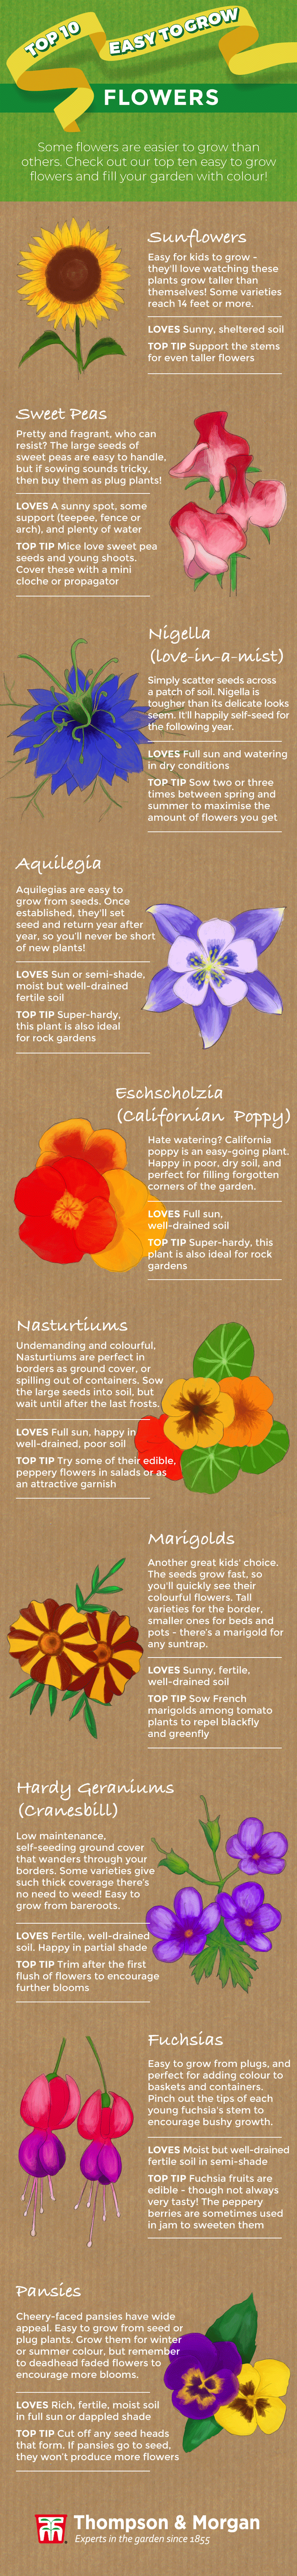 top ten easy to grow flowers infographic from thompson & morgan